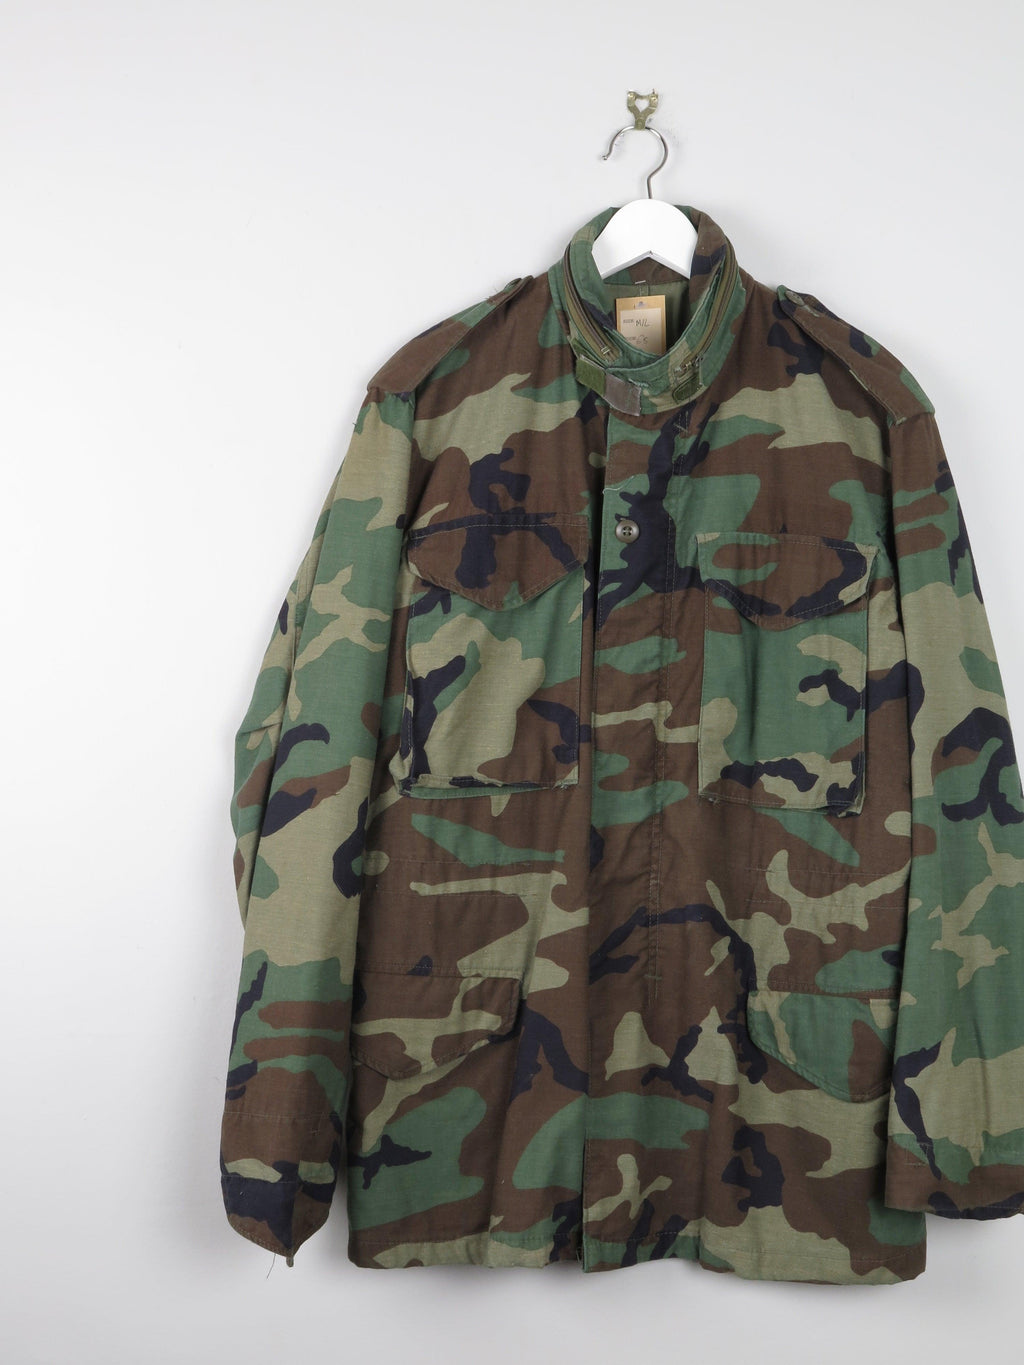 Men’s Green Camouflage Army Jacket L - The Harlequin